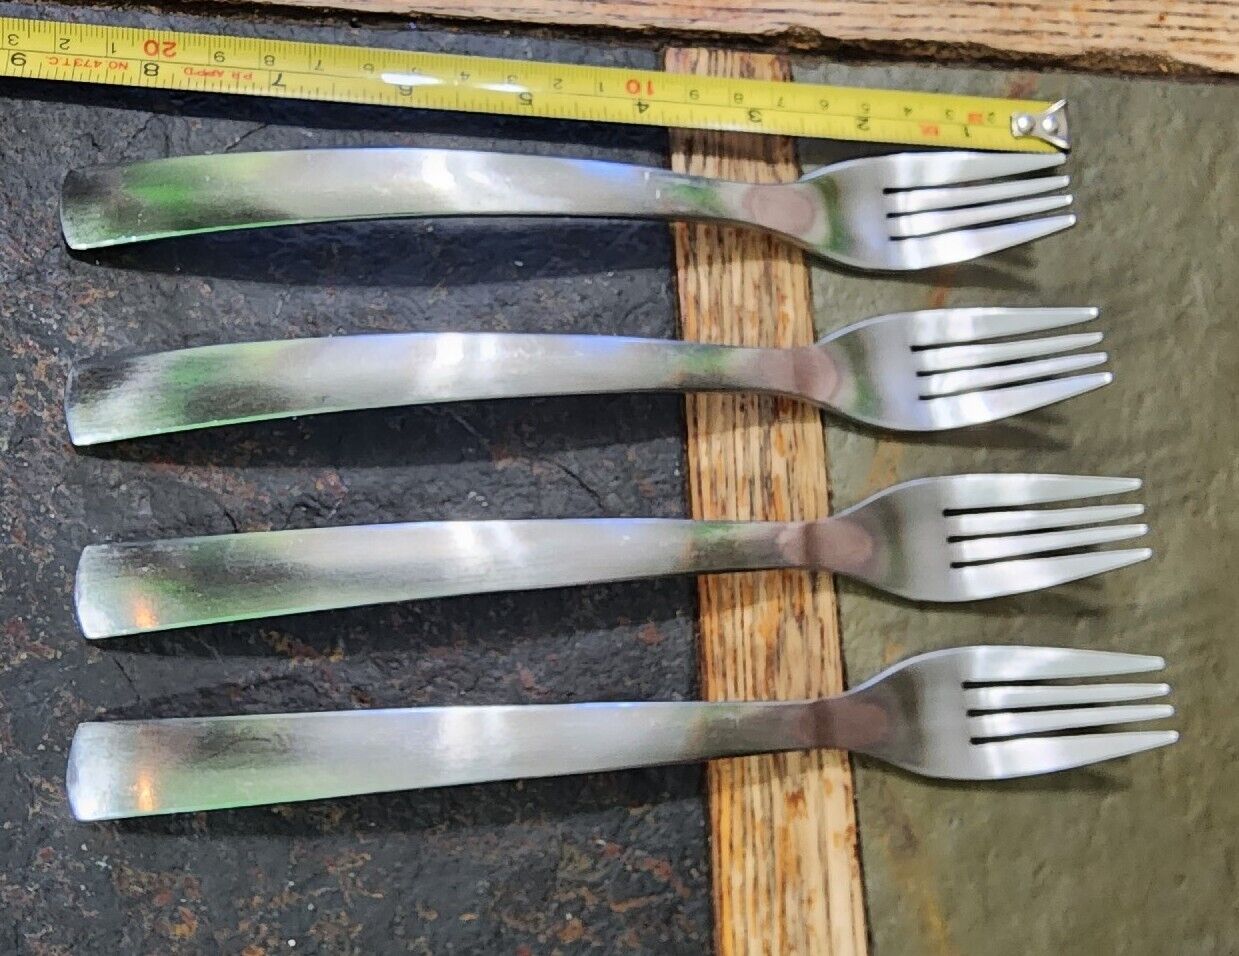 LOT OF 4 MID-CENTURY-MODERN STYLE HEAVY STAINLESS STEEL LARGE DINNER FORKS 🍽😋